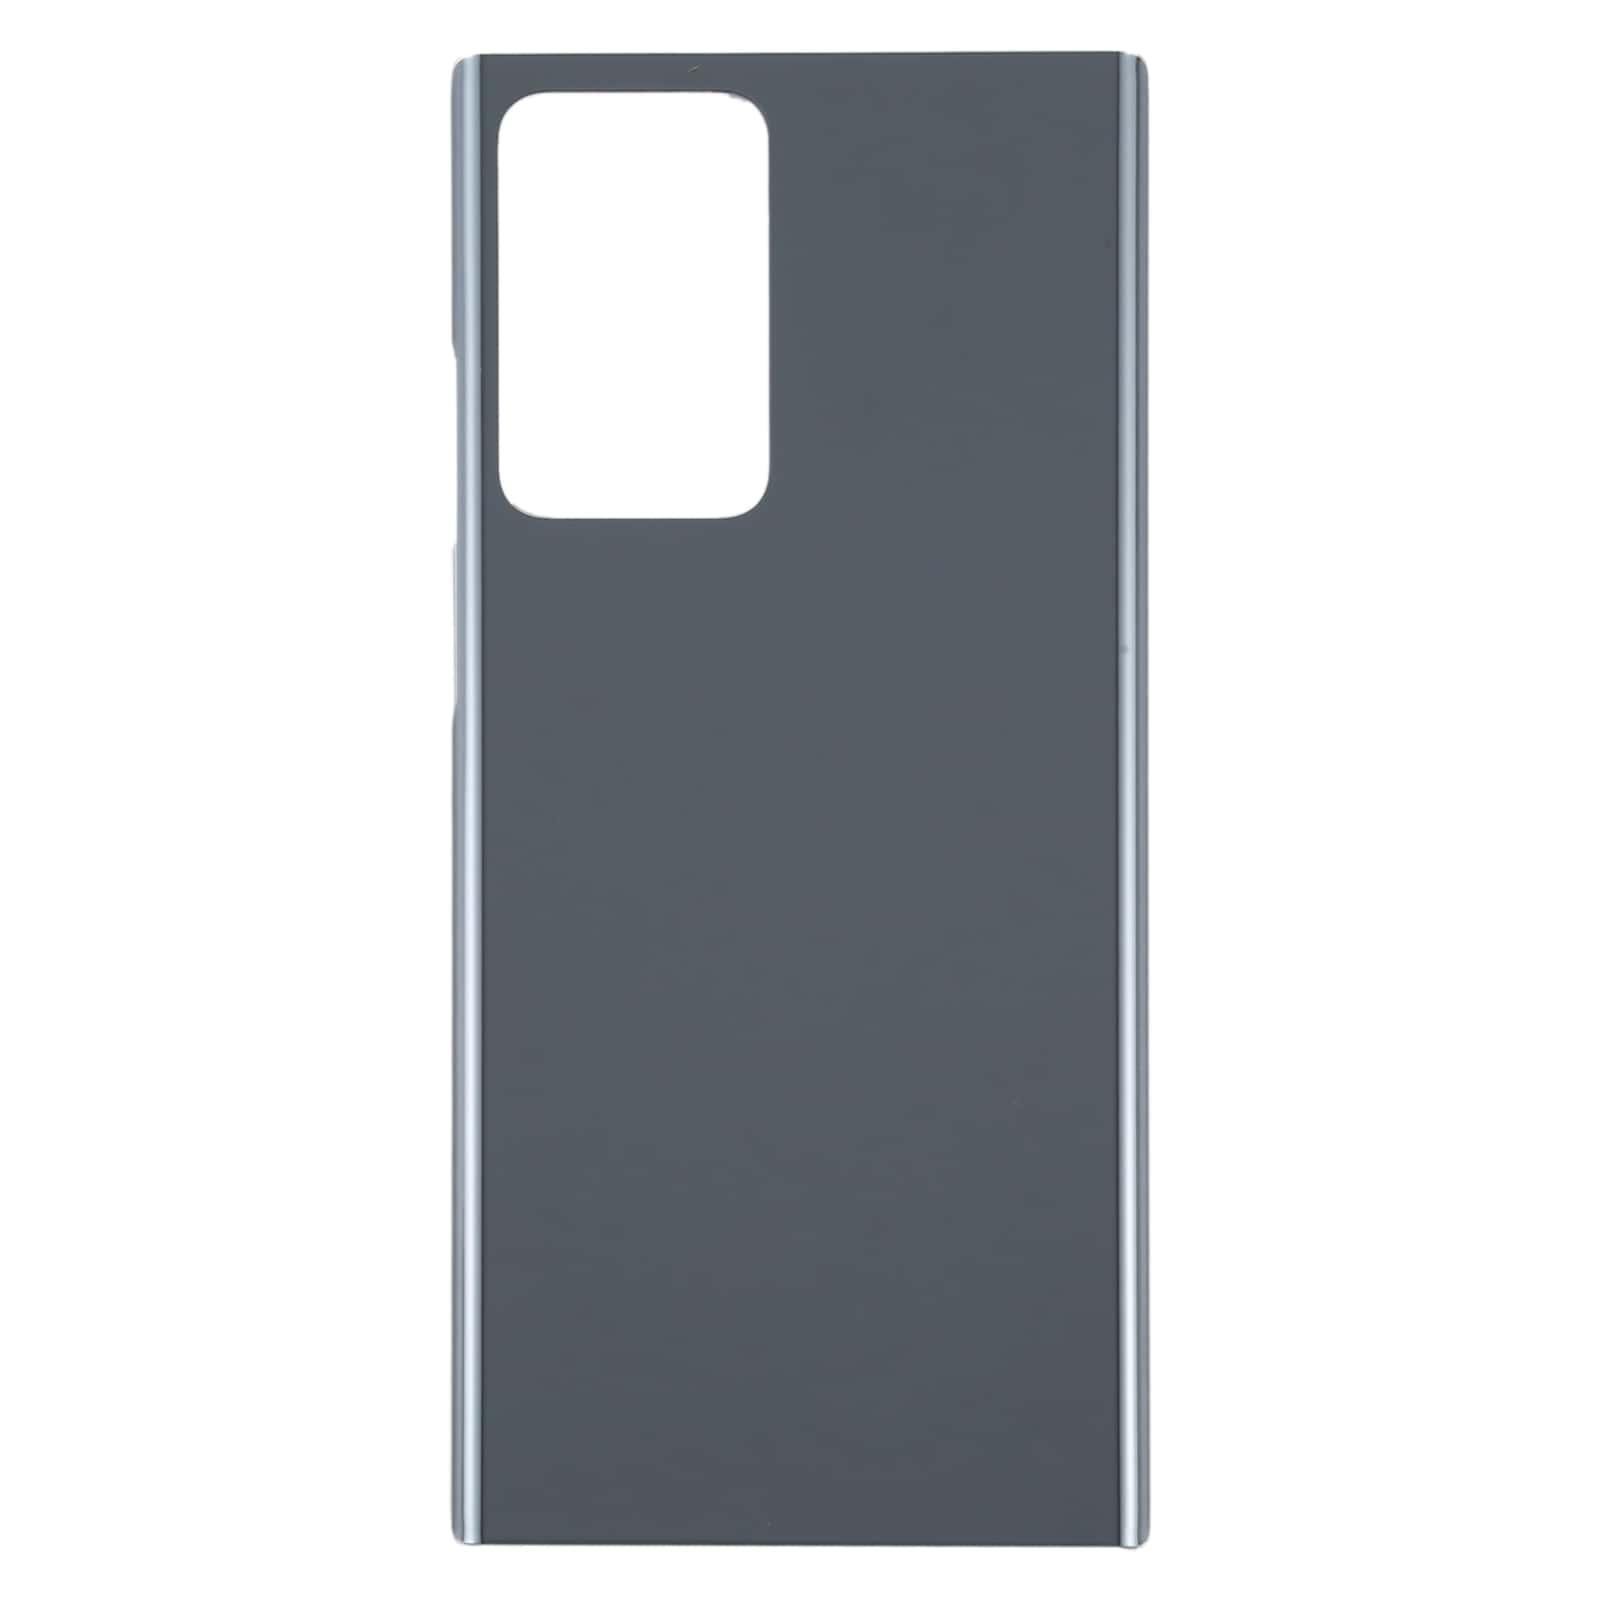 Back Glass Panel for  Samsung Galaxy Note20 Ultra Black